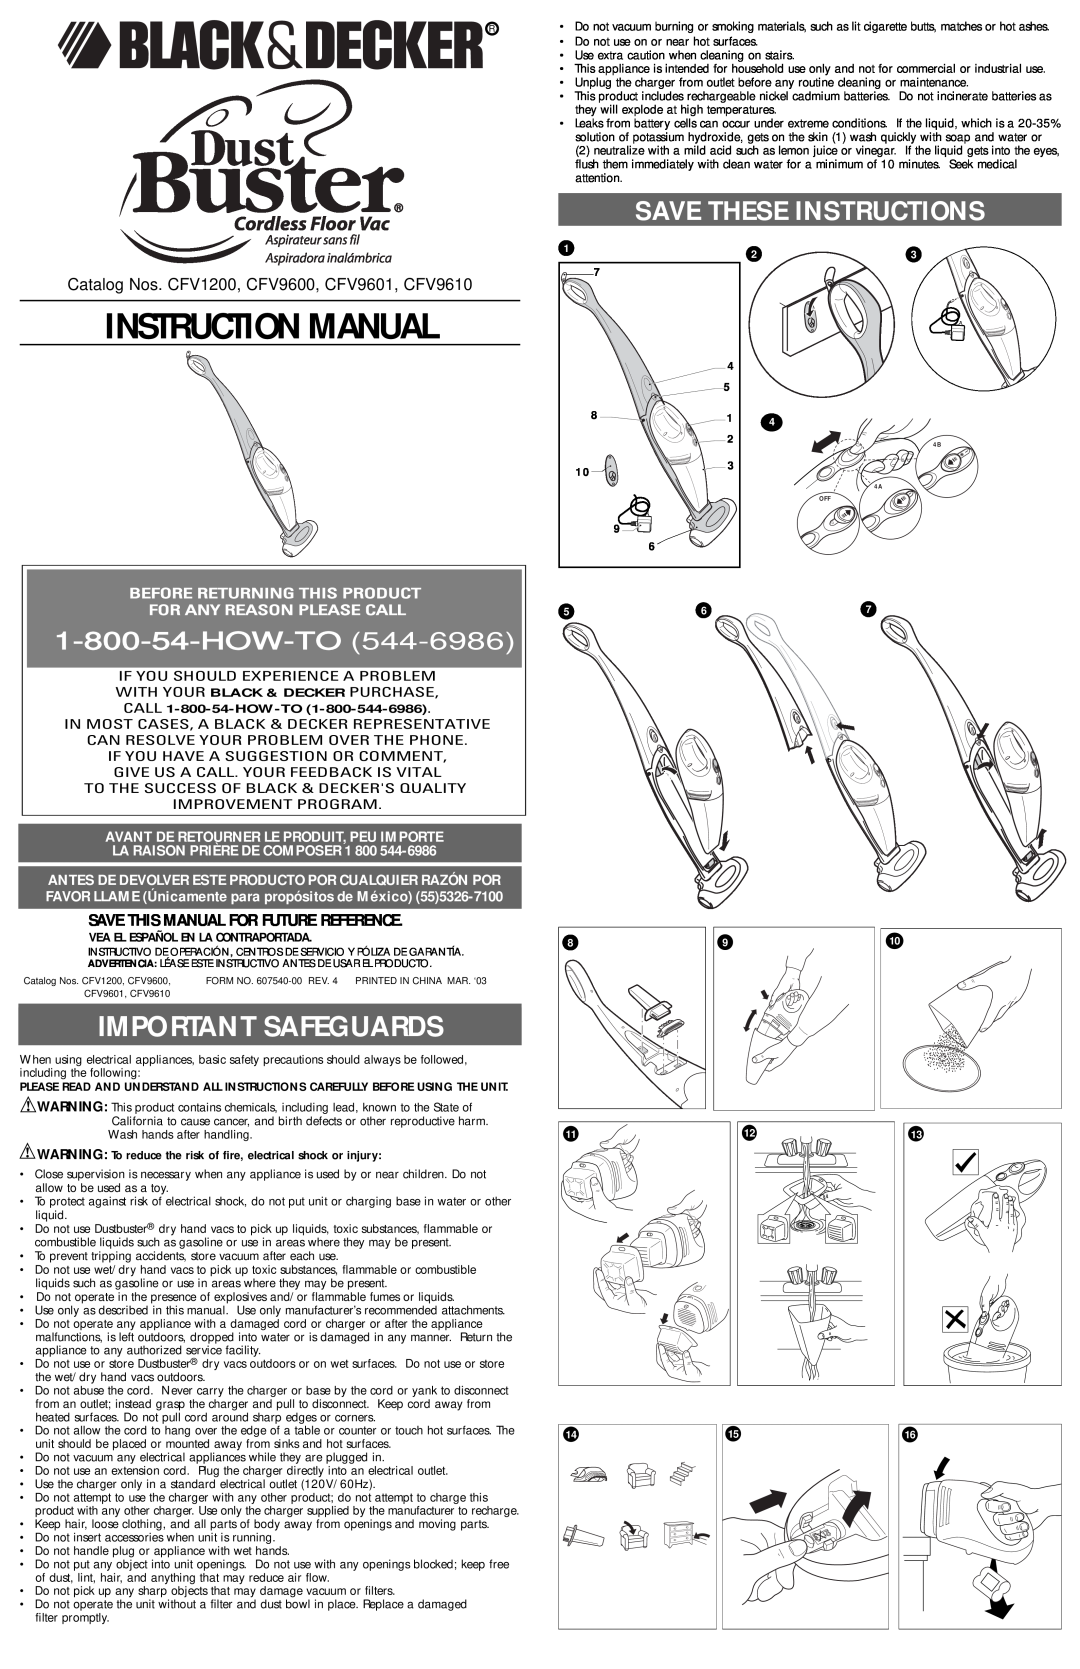 Black & Decker CFV9601 instruction manual Save These Instructions, Instruction Manual, Important Safeguards, How-To 